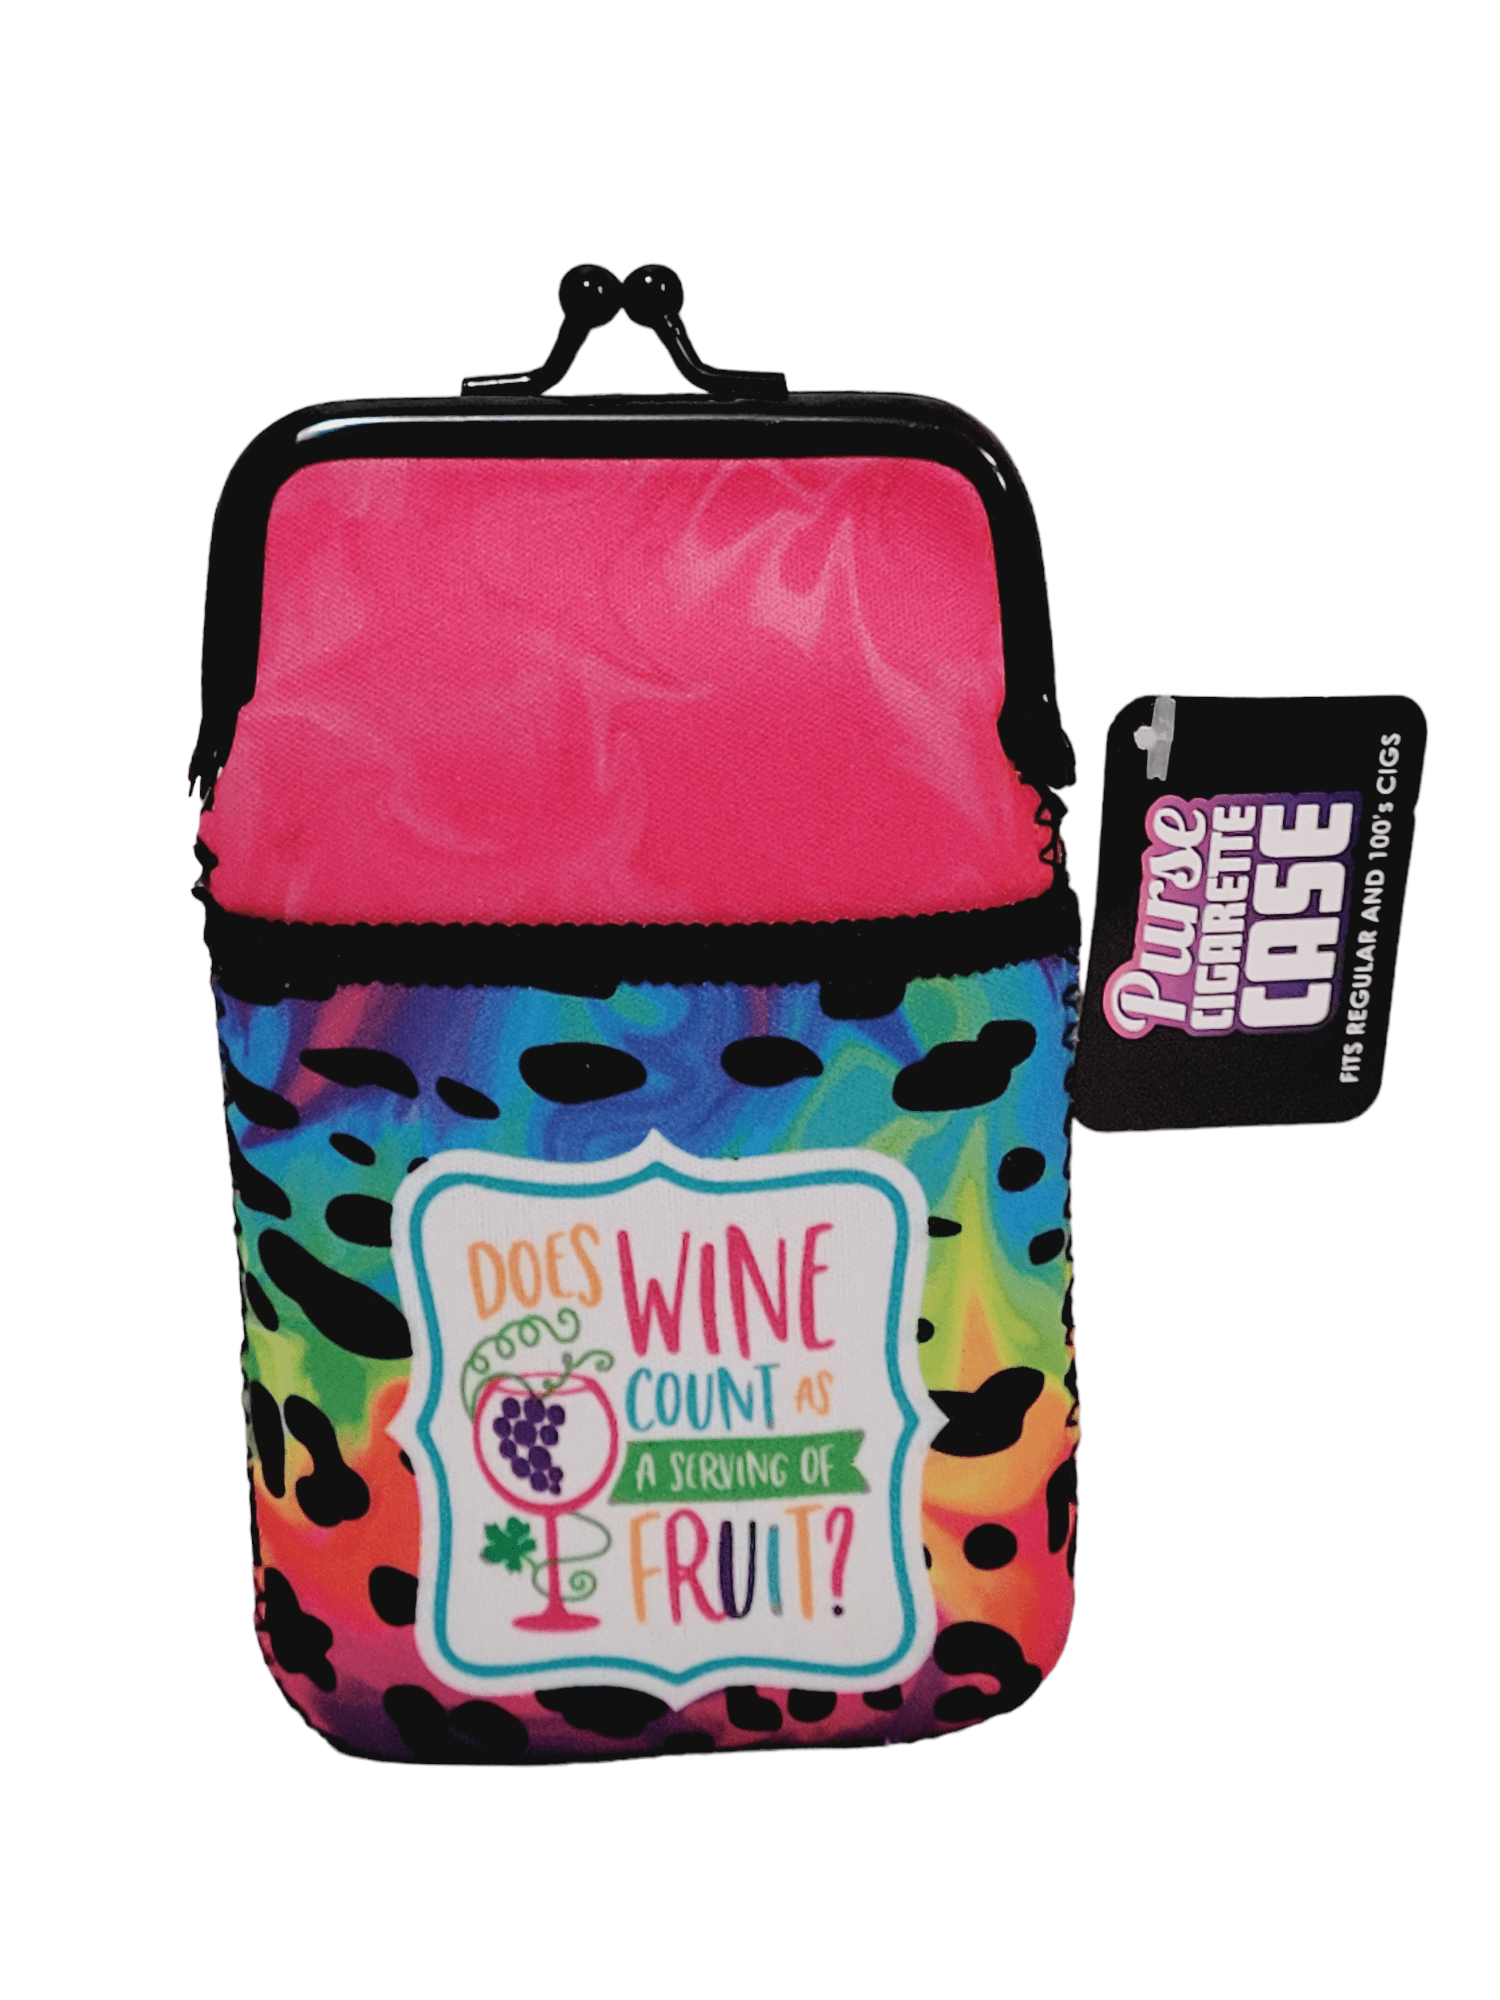 Texcyngoods Cigarette Case for Women 100s Tampon Holder Change Purse with Zip Pocket Does Wine Count As Fruit, Women's, Size: One size, Pink